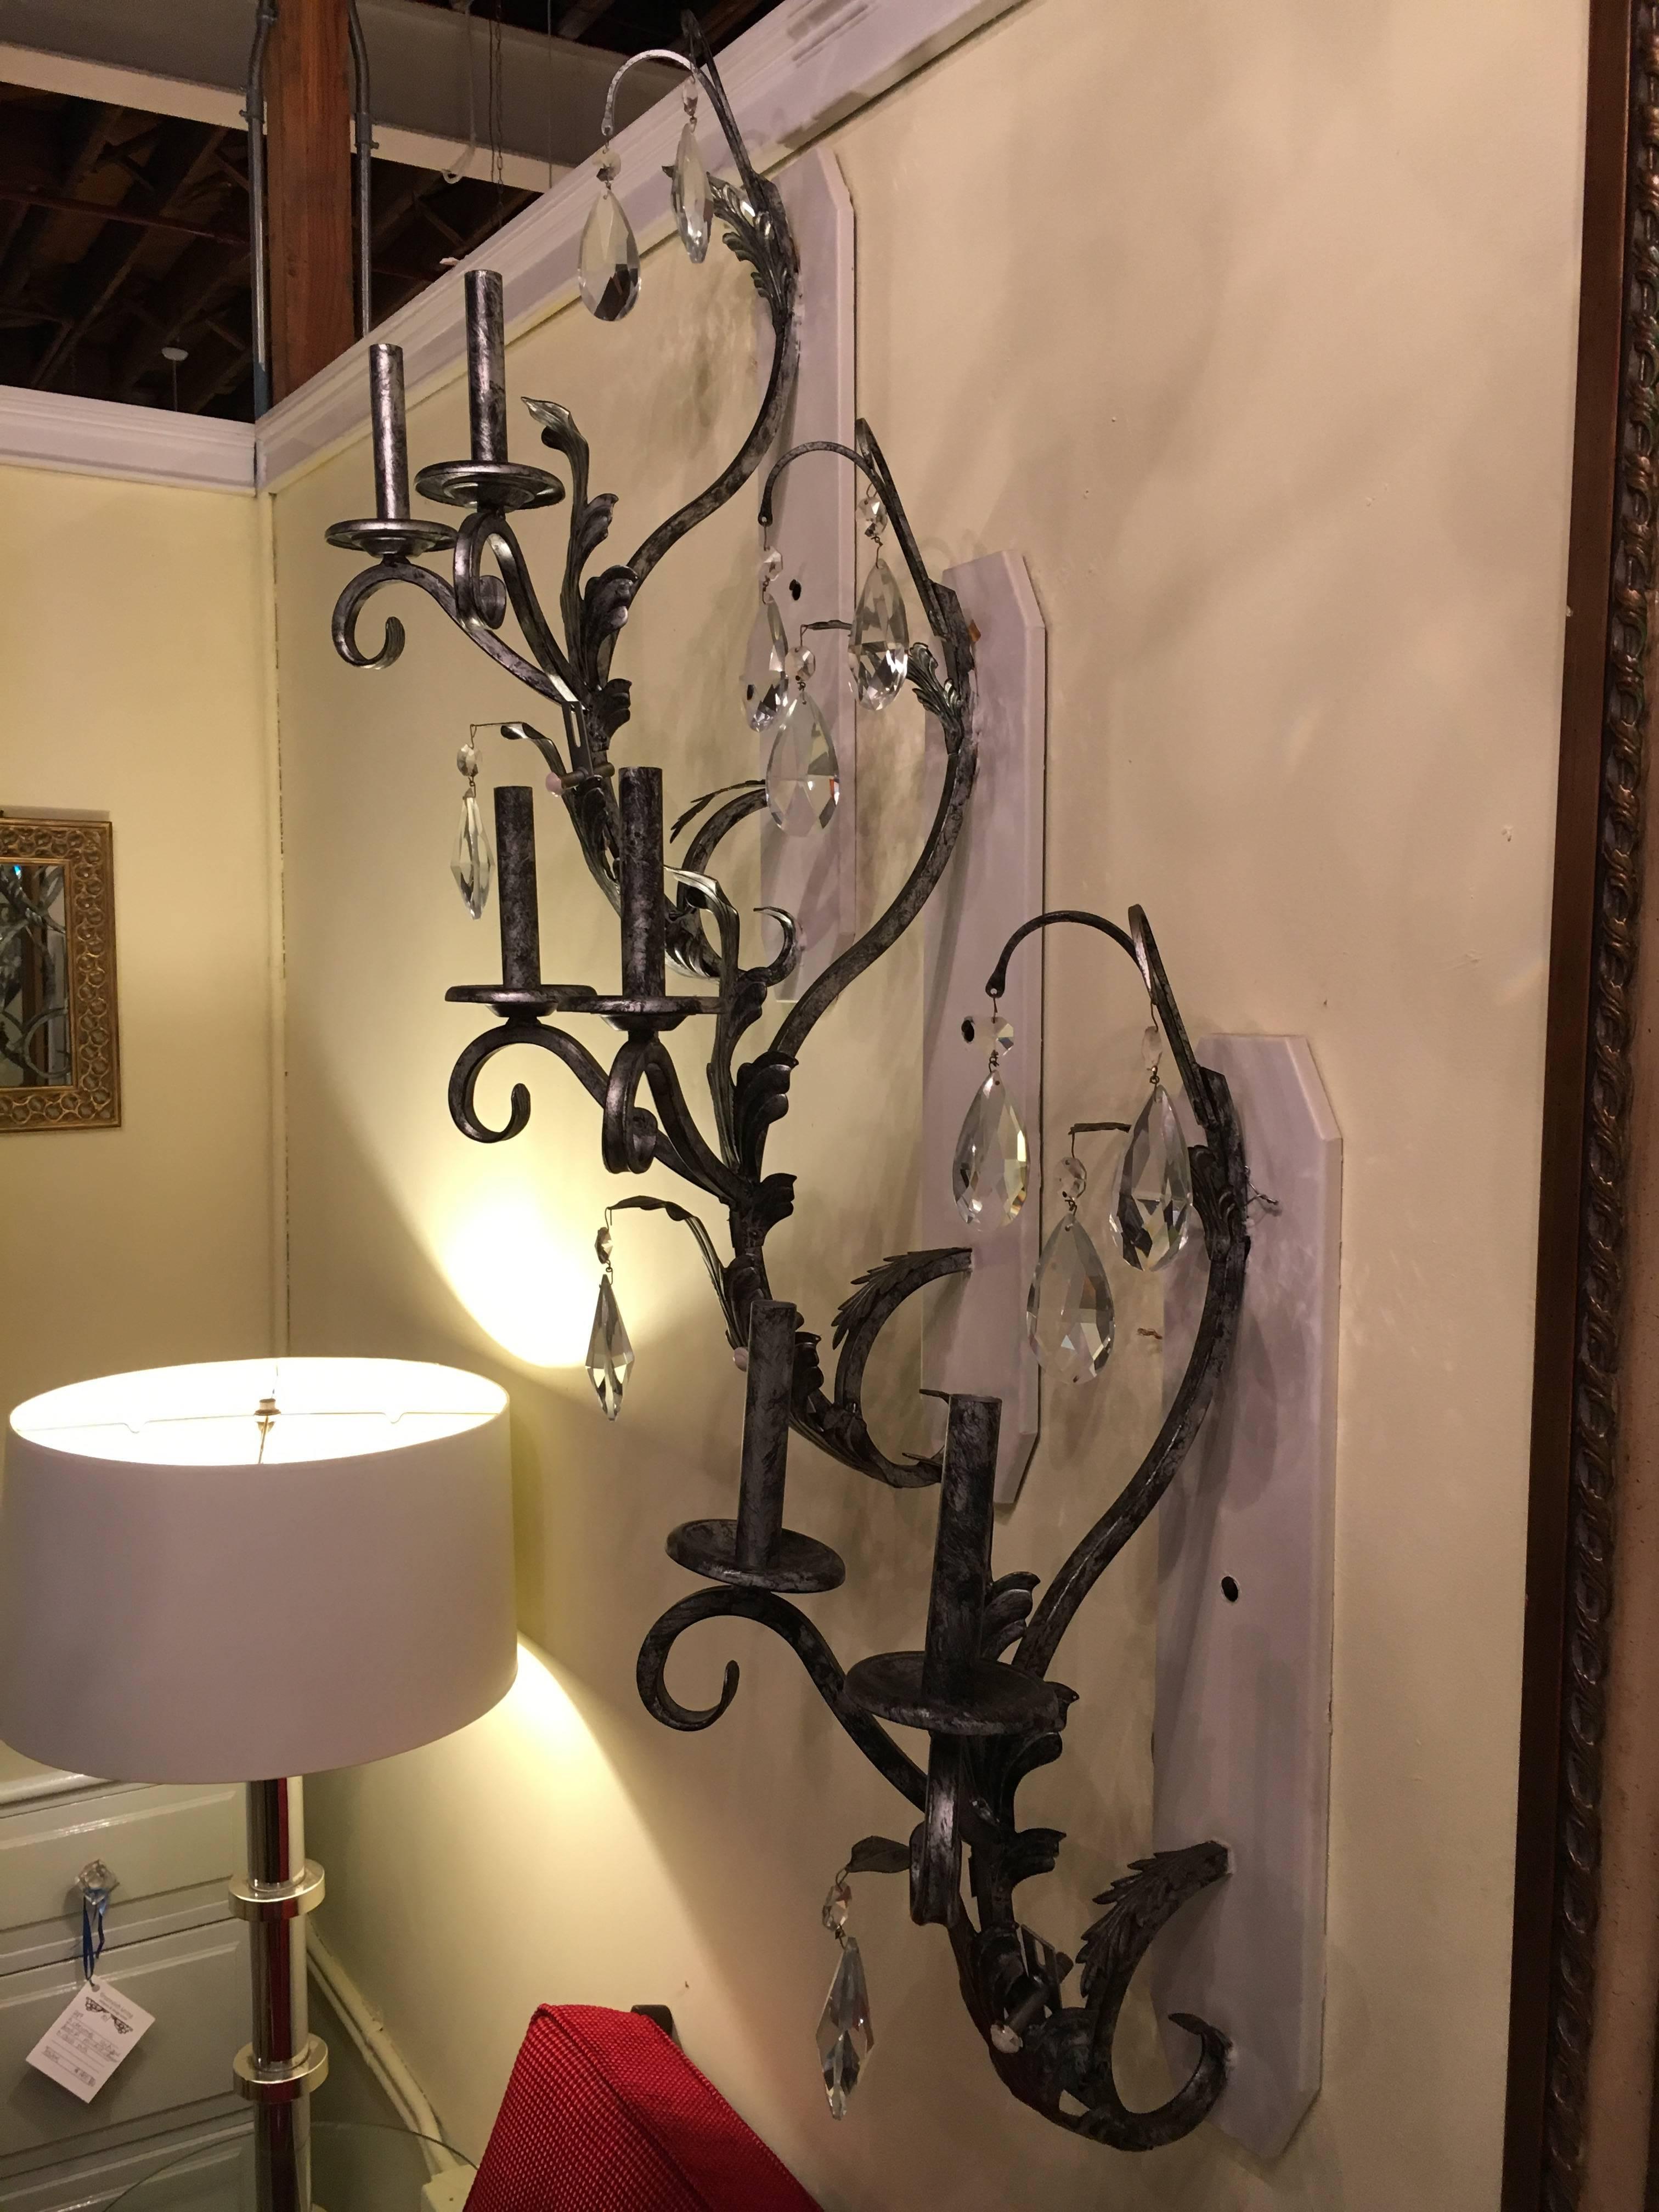 Set of six silver rustic two-light wall sconce by Schonbek. Each mounted on a metal back plate that is paint able and measures 23 inches by 4.5 inches. The fine hand-cut German crystals supported by a leaf and curved design sconce taking two 40